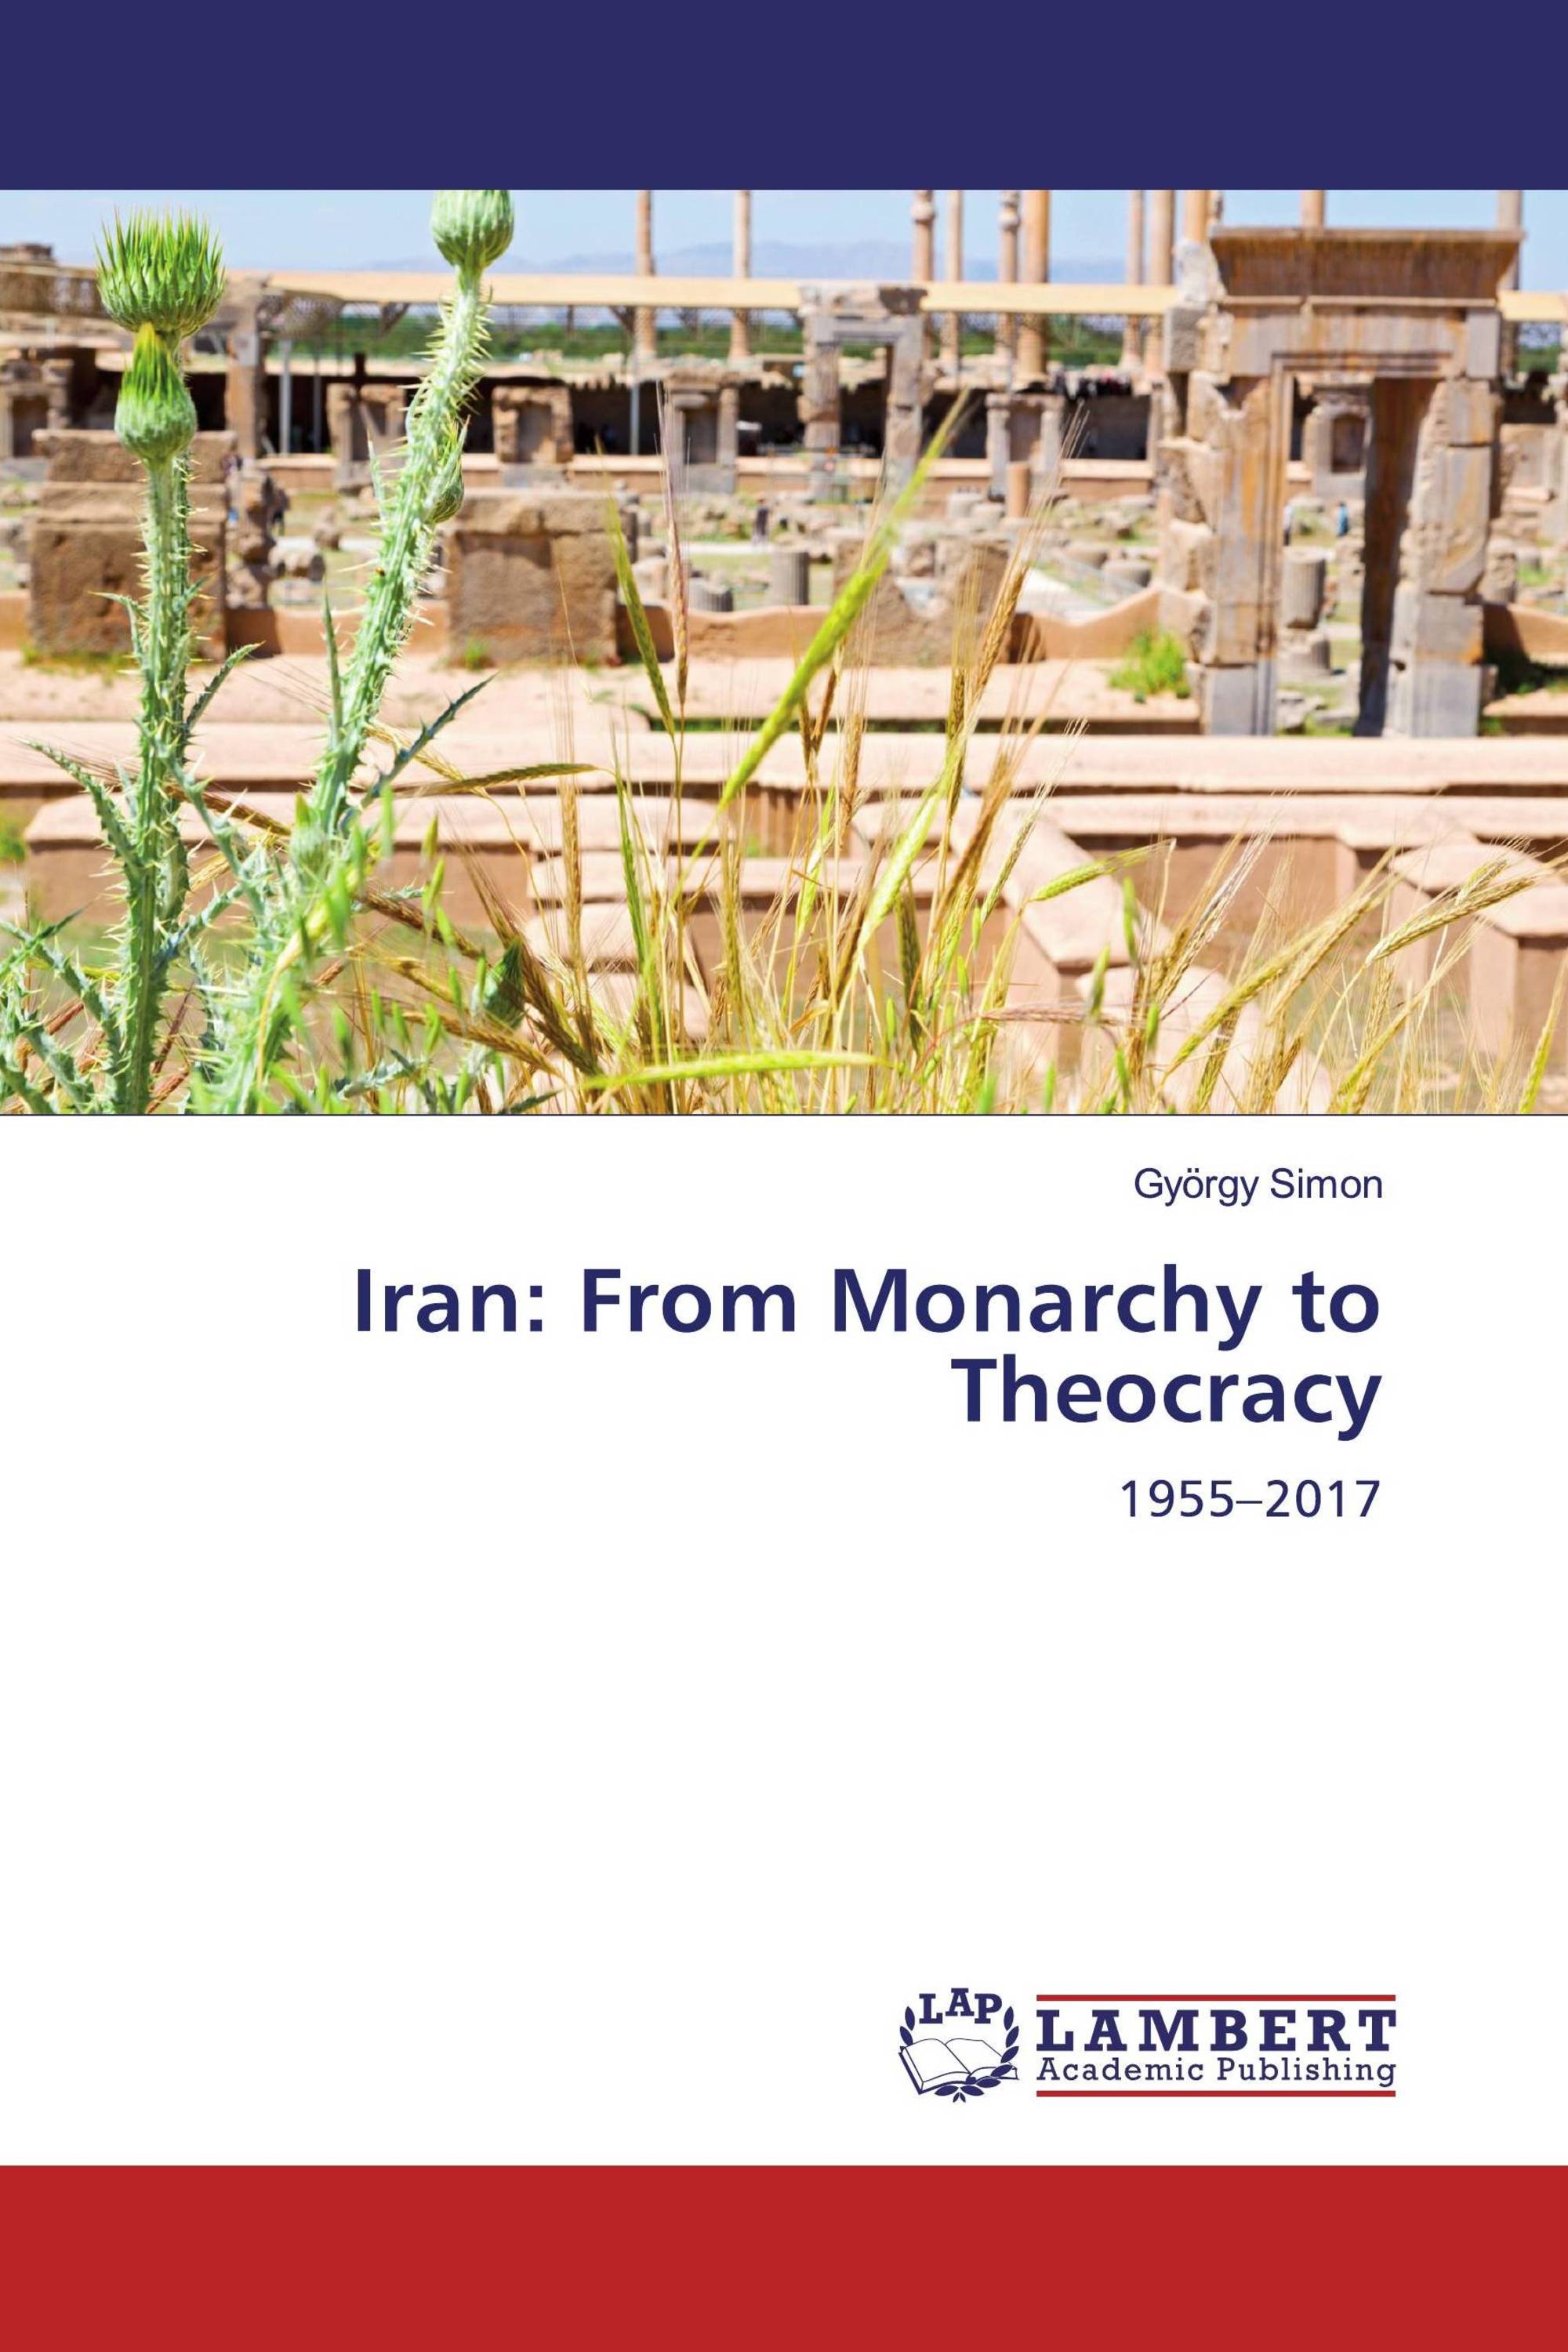 Iran: From Monarchy to Theocracy